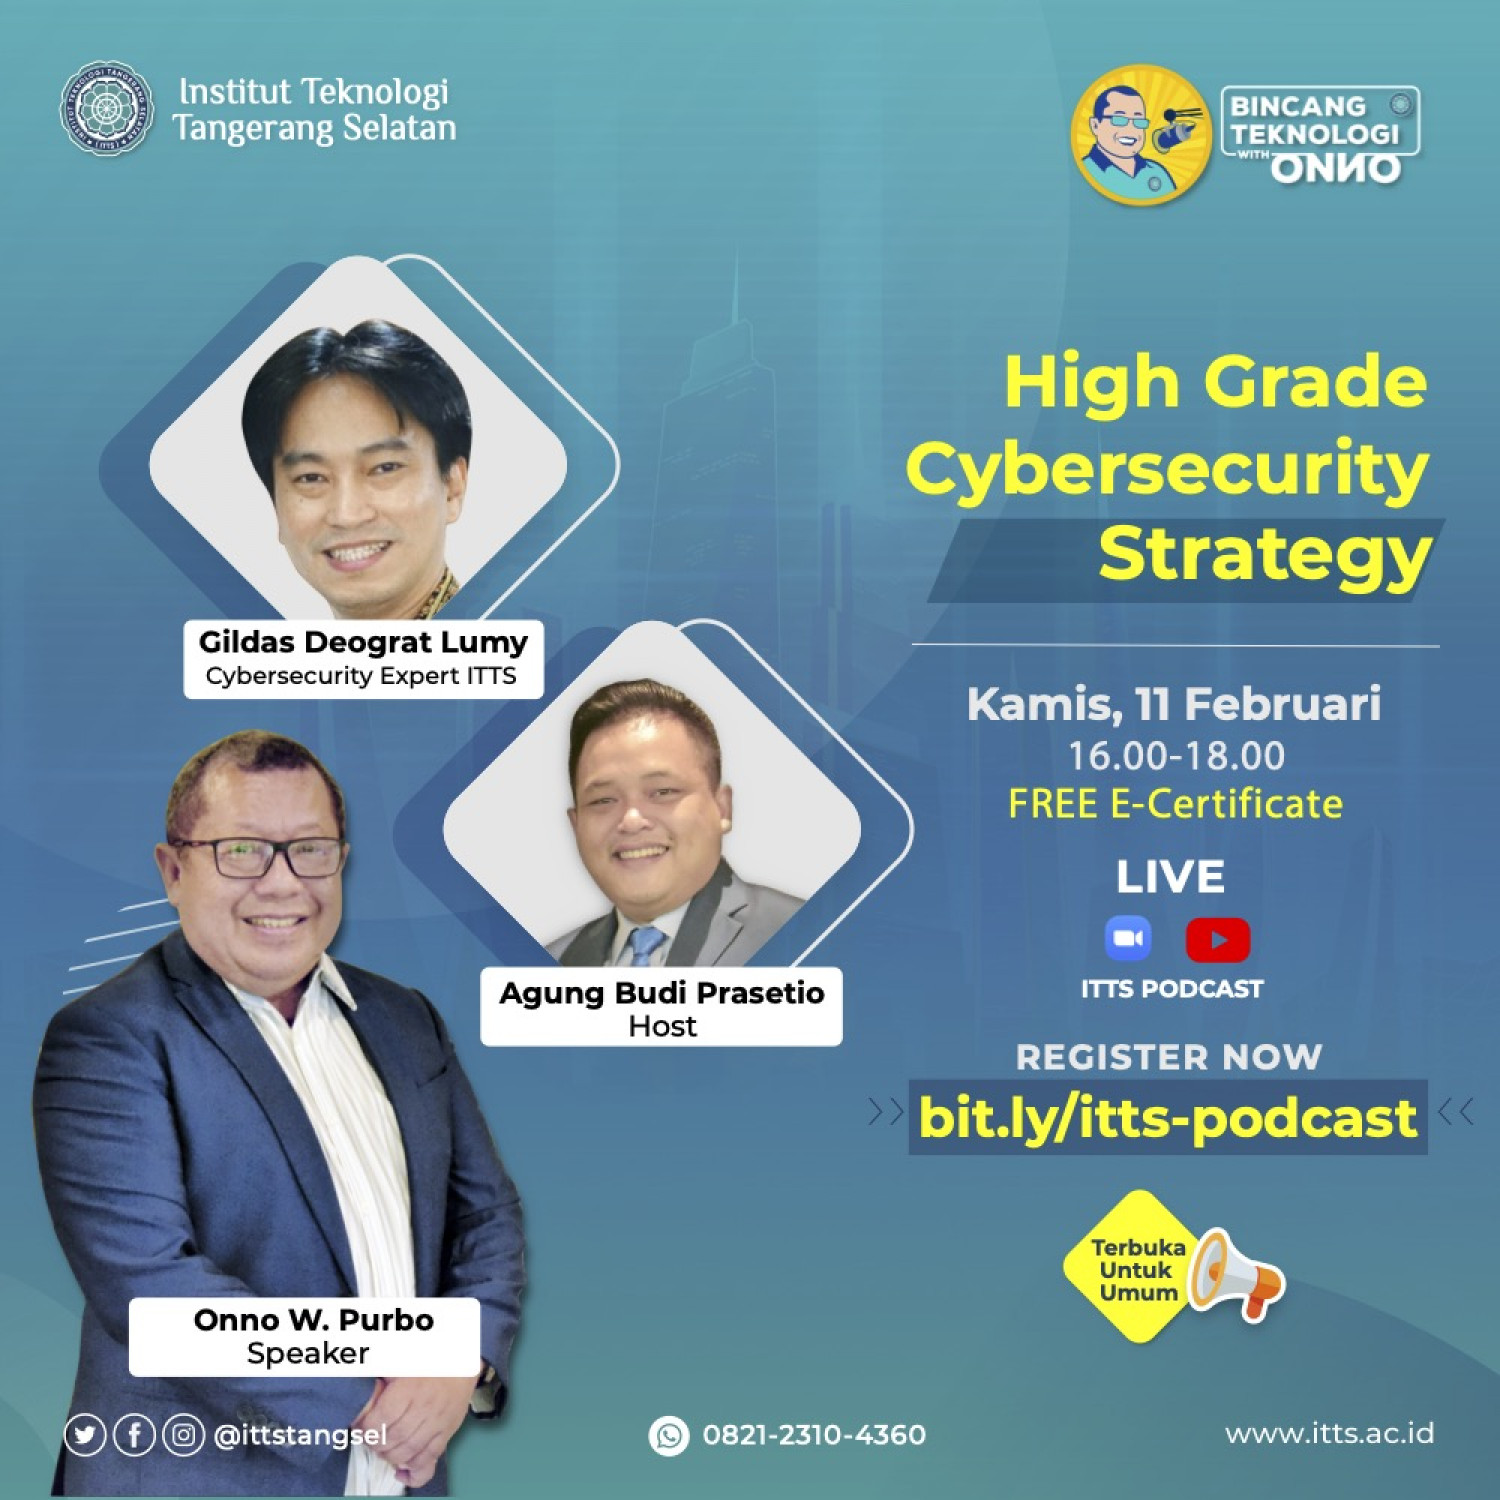 ITTSPODCAST EPISODE 2 - HIGH GRADE CYBER SECURITY STRATEGY